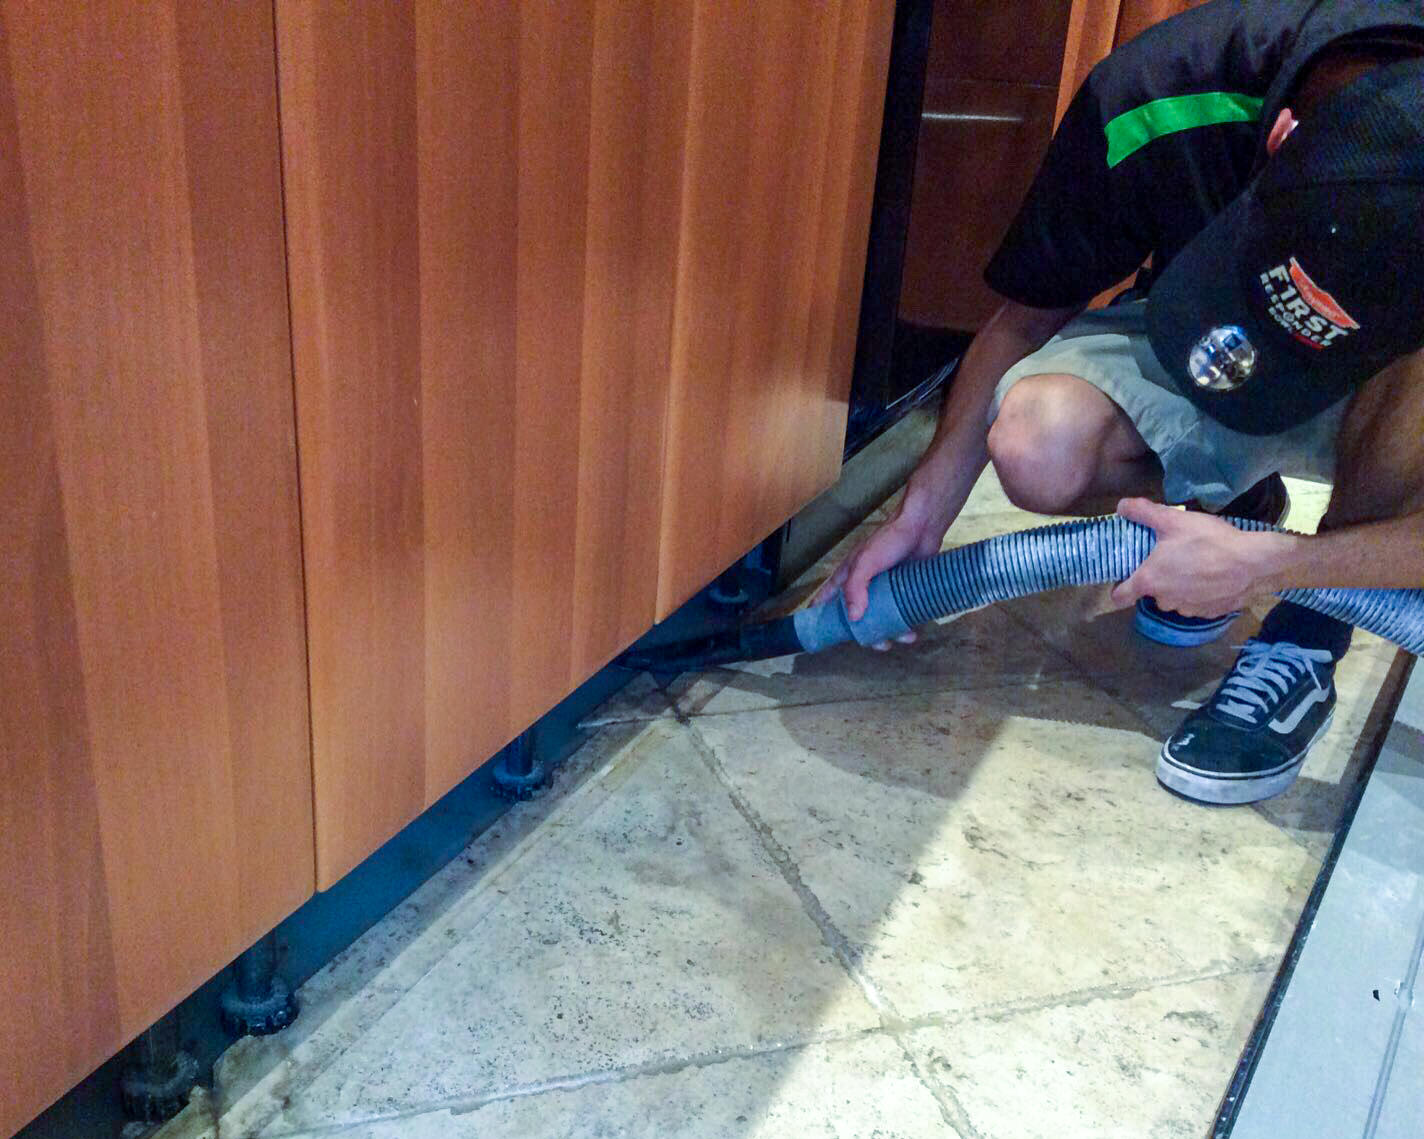 Call SERVPRO of South Palm Beach for your water damage needs and let us help make your water loss "Like it never even happened."